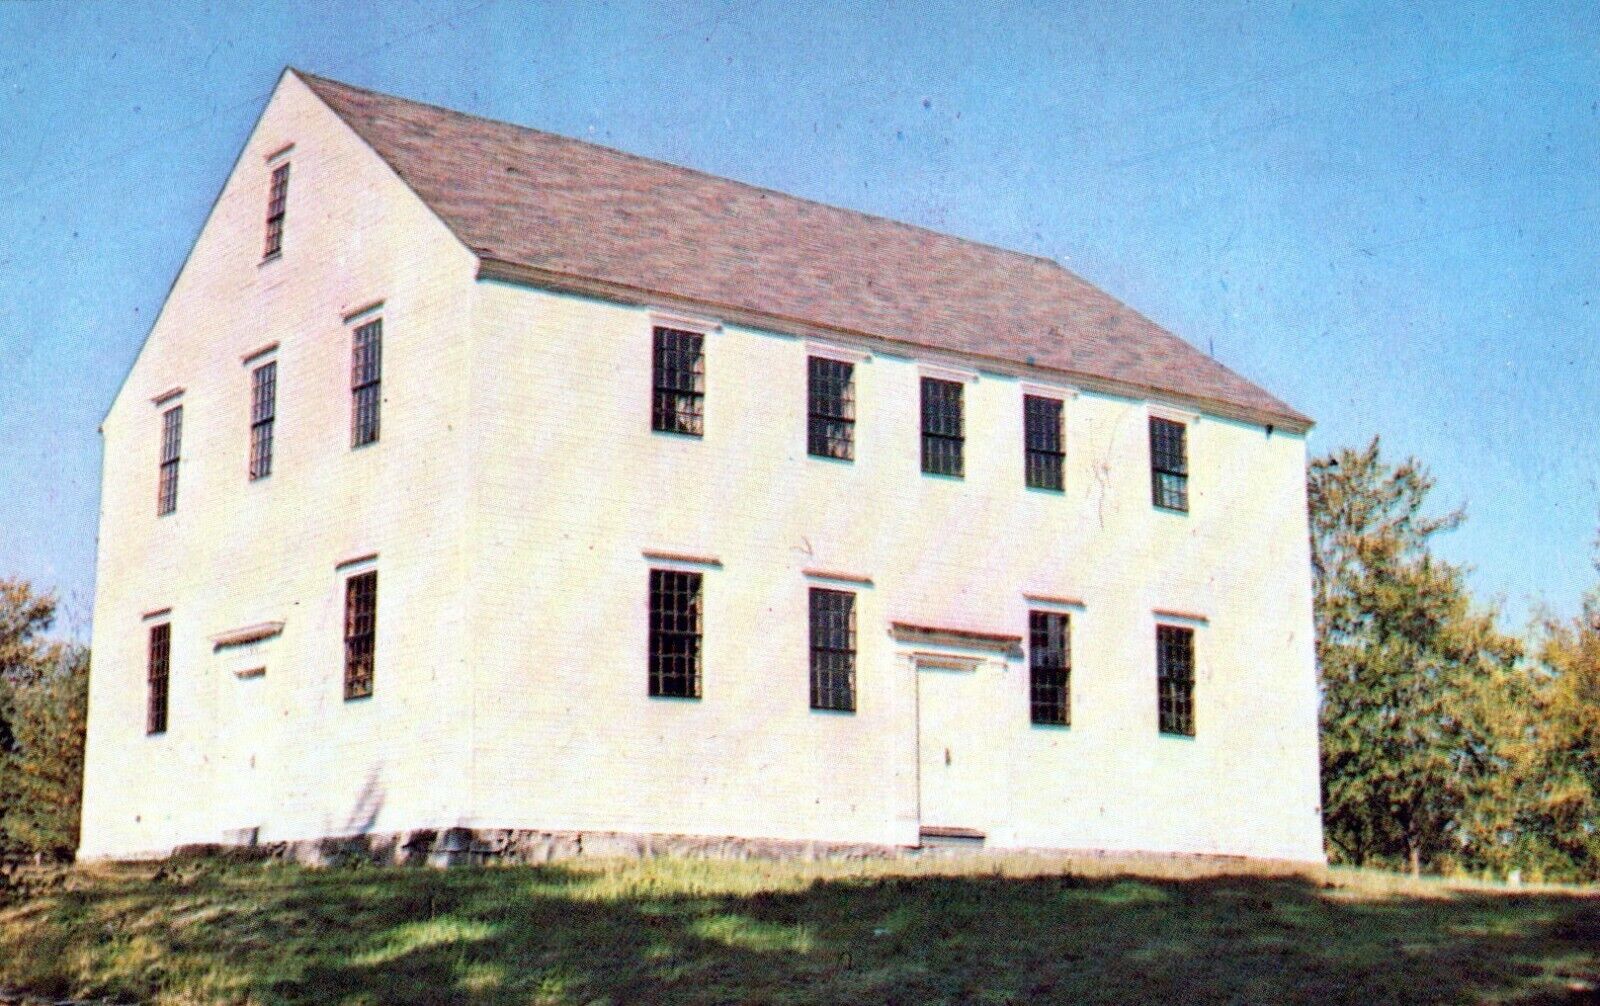 The Old Meeting House 1760 Danville New Hampshire Vintage Chrome Post Card